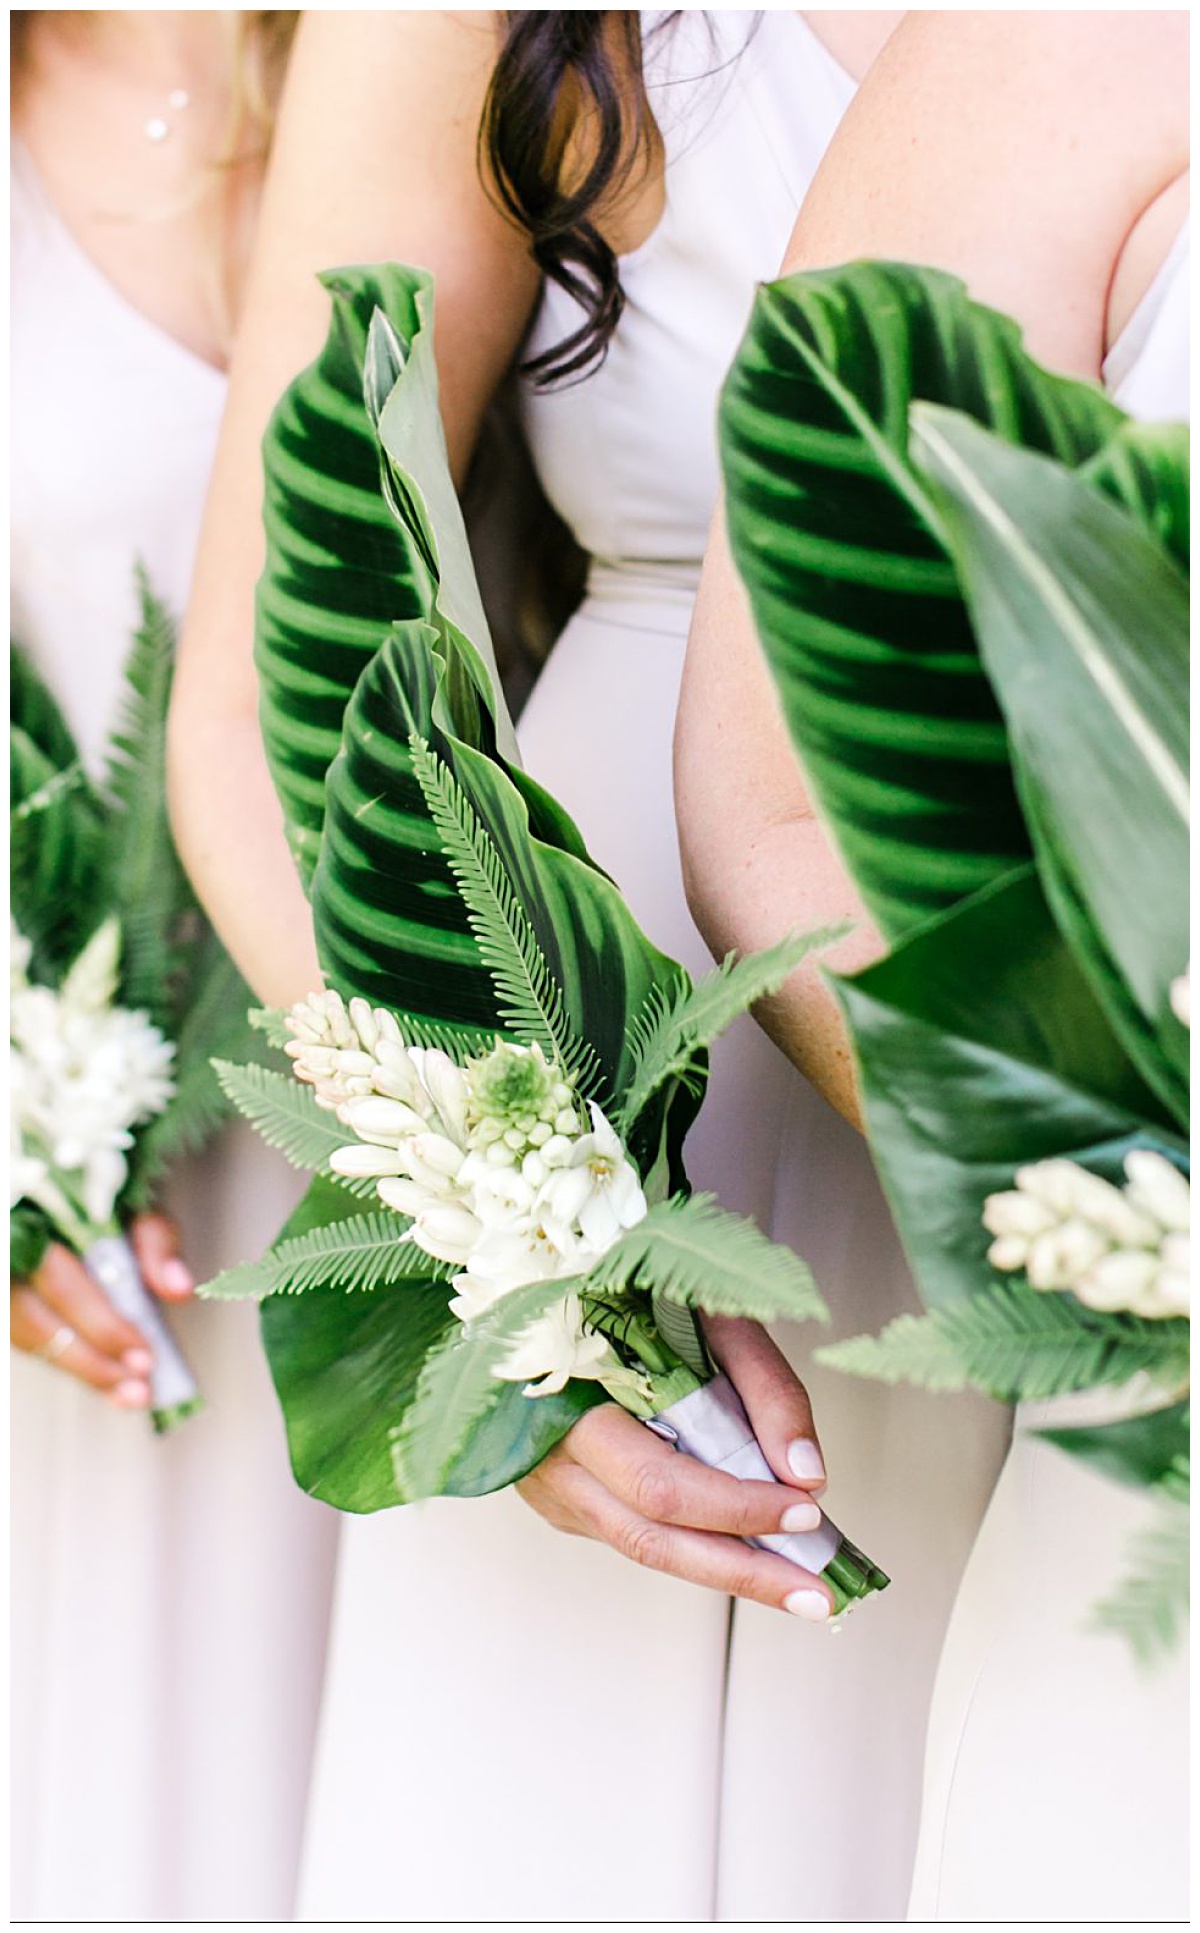 Modern minimalist bridal bouquet image from marthastewart.com . What's your style bouquet guide from Emery's Buffalo Creek 